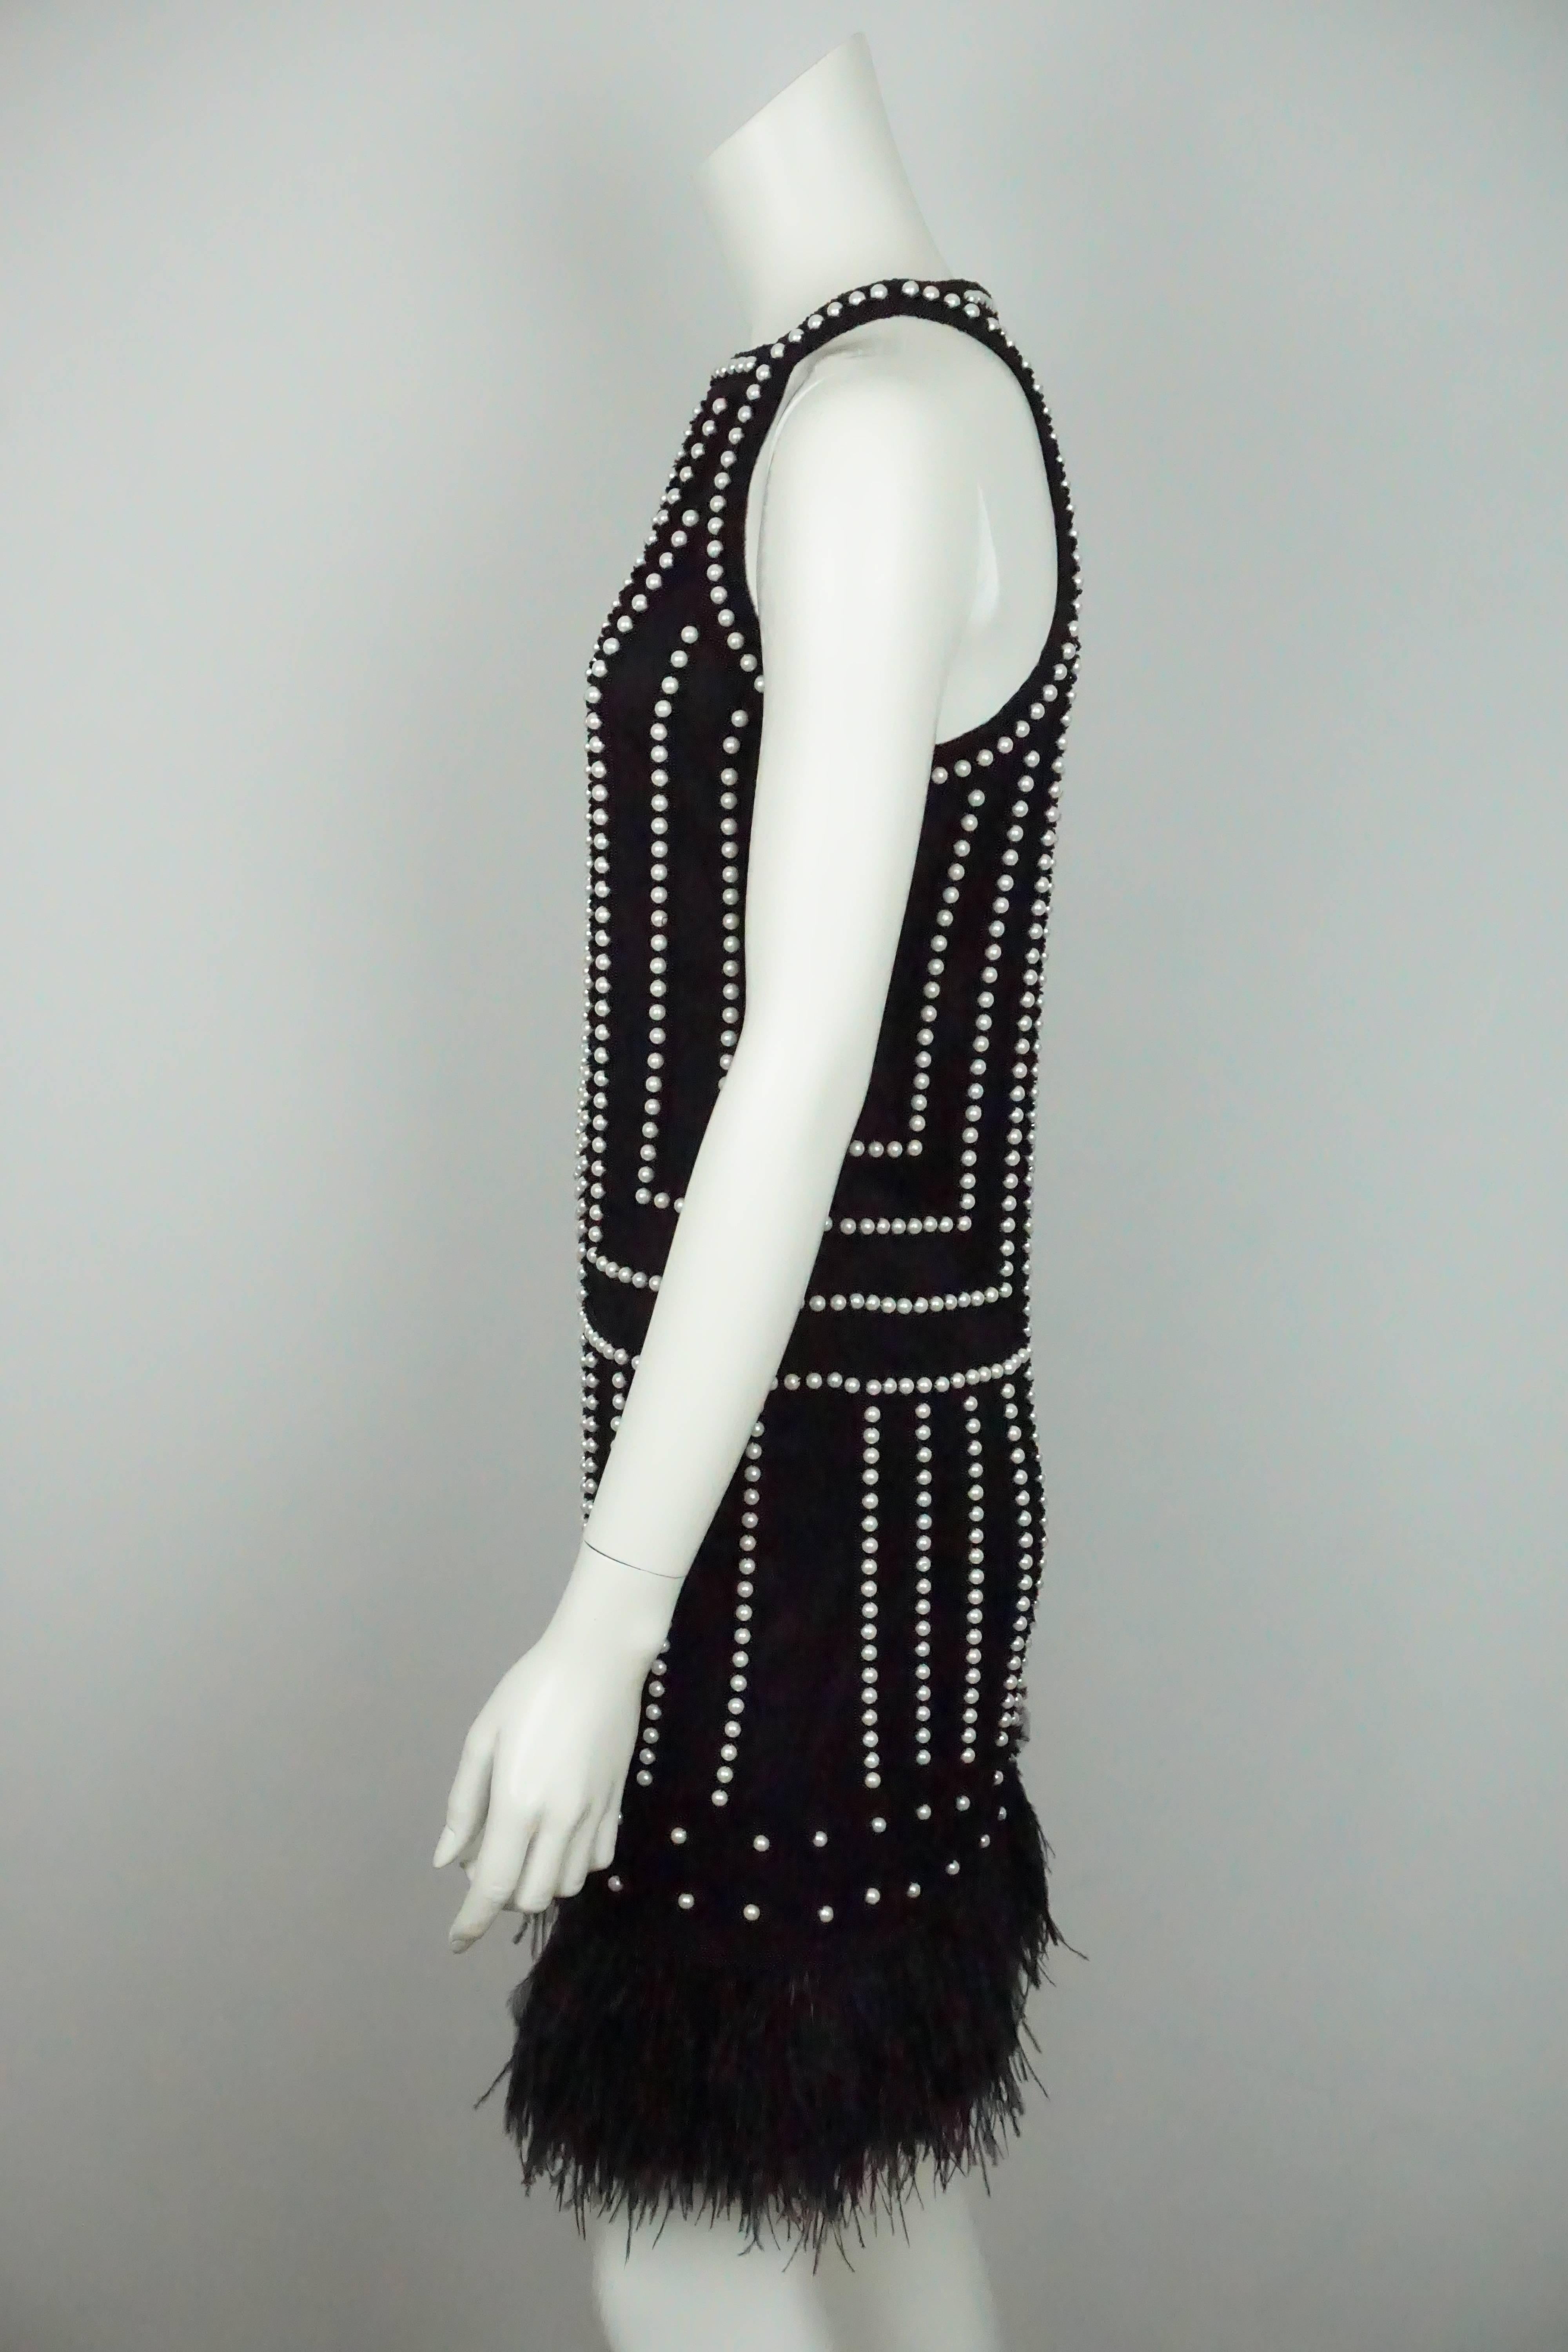 Joanna Mastroianni Black Sleeveless Pearl Beaded Dress w/ Feathers - 2  This beautiful silk dress is in excellent condition. This dress has two layers, the first is the lining that is completely made of black silk. The second layer is a mesh